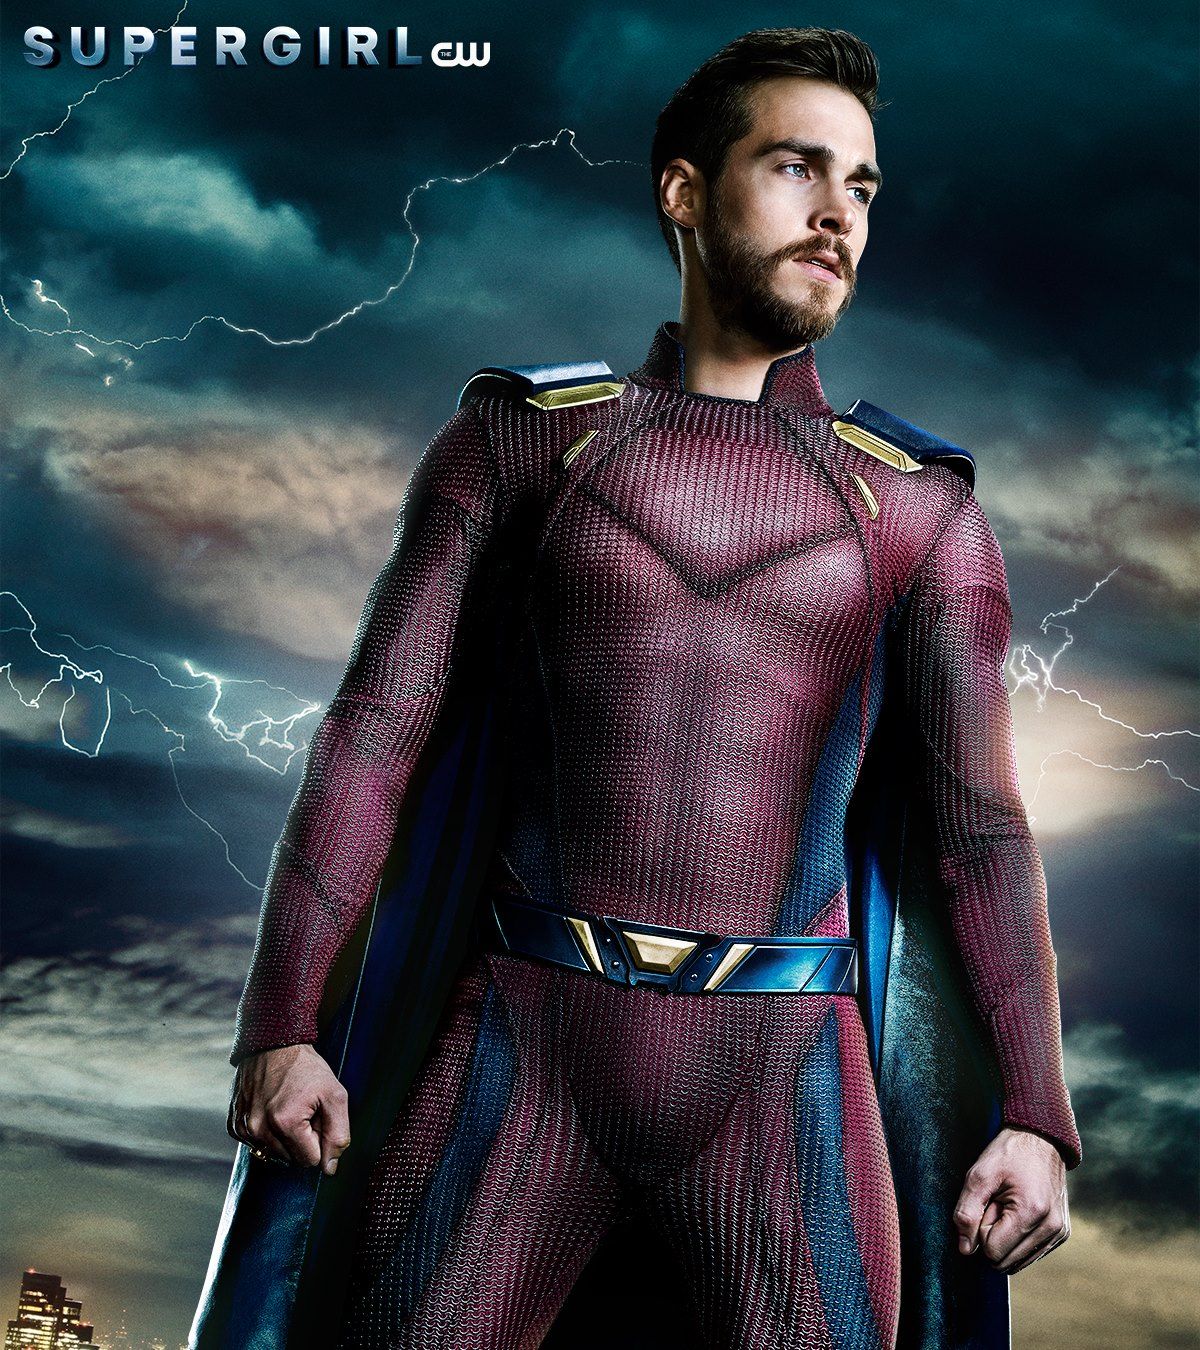 Supergirl's Mon-El rocks his comics-accurate costume in an official poster.